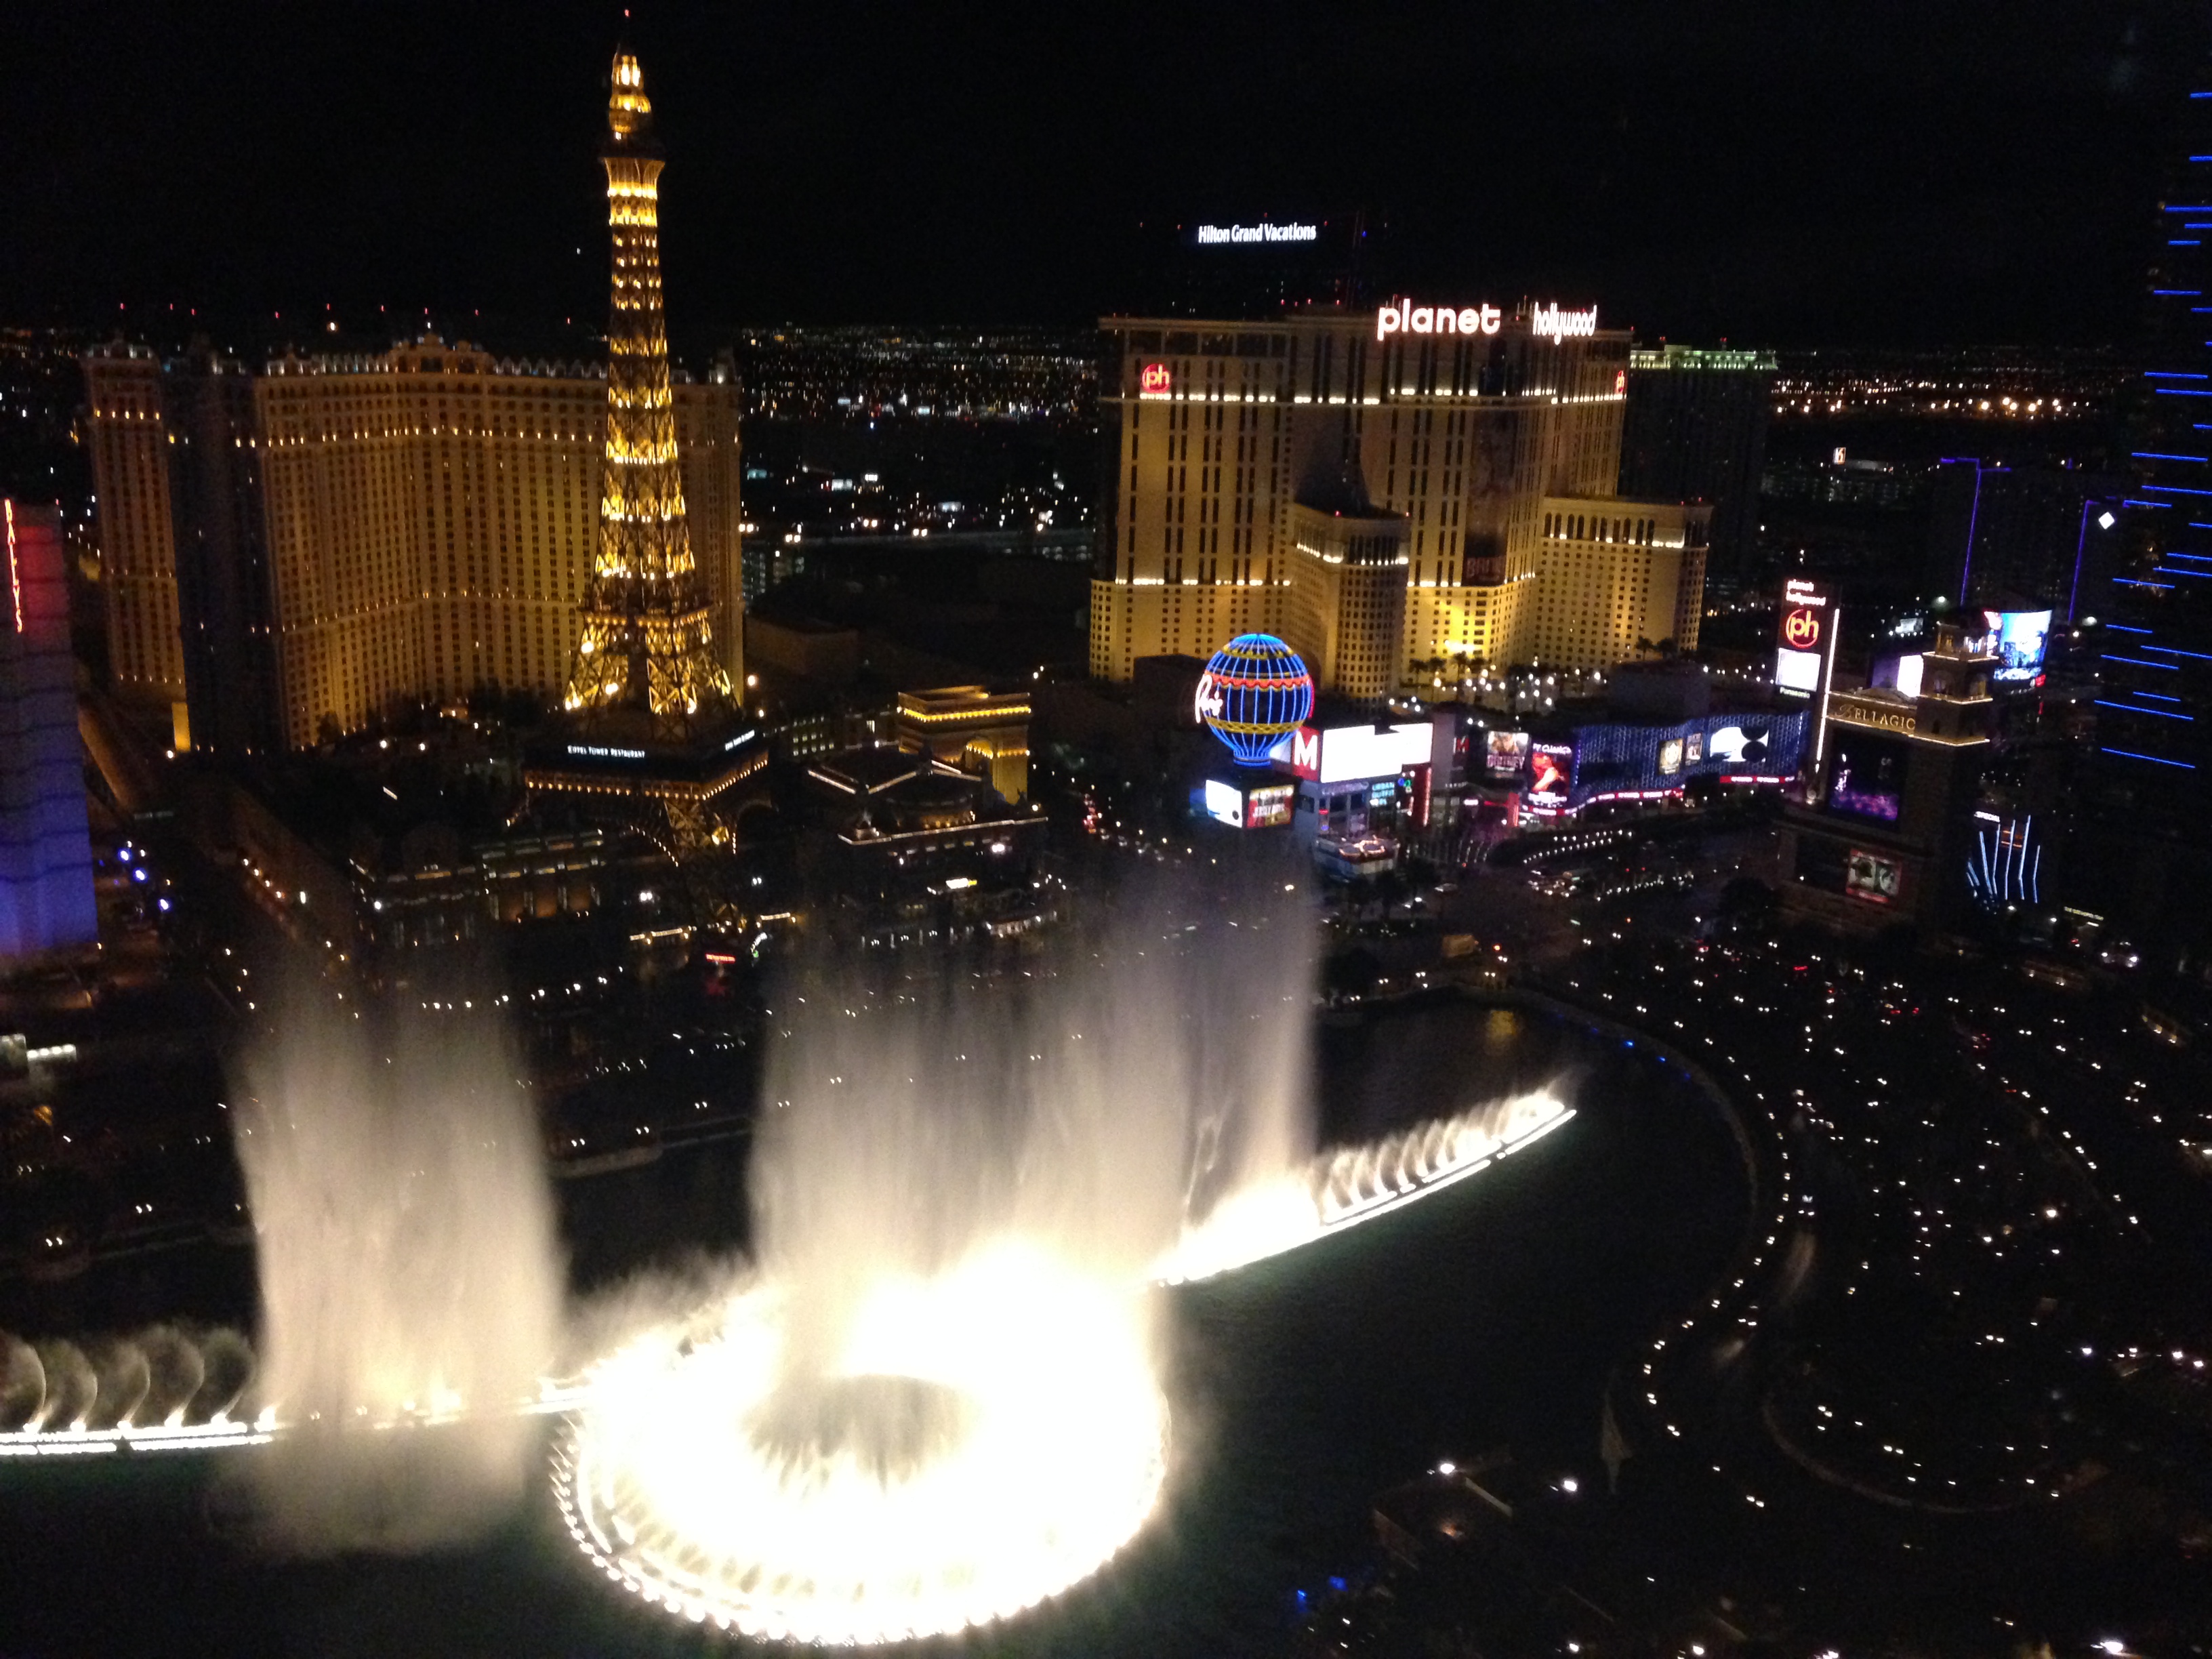 How We Got A Penthouse Suite At The Bellagio With The 20